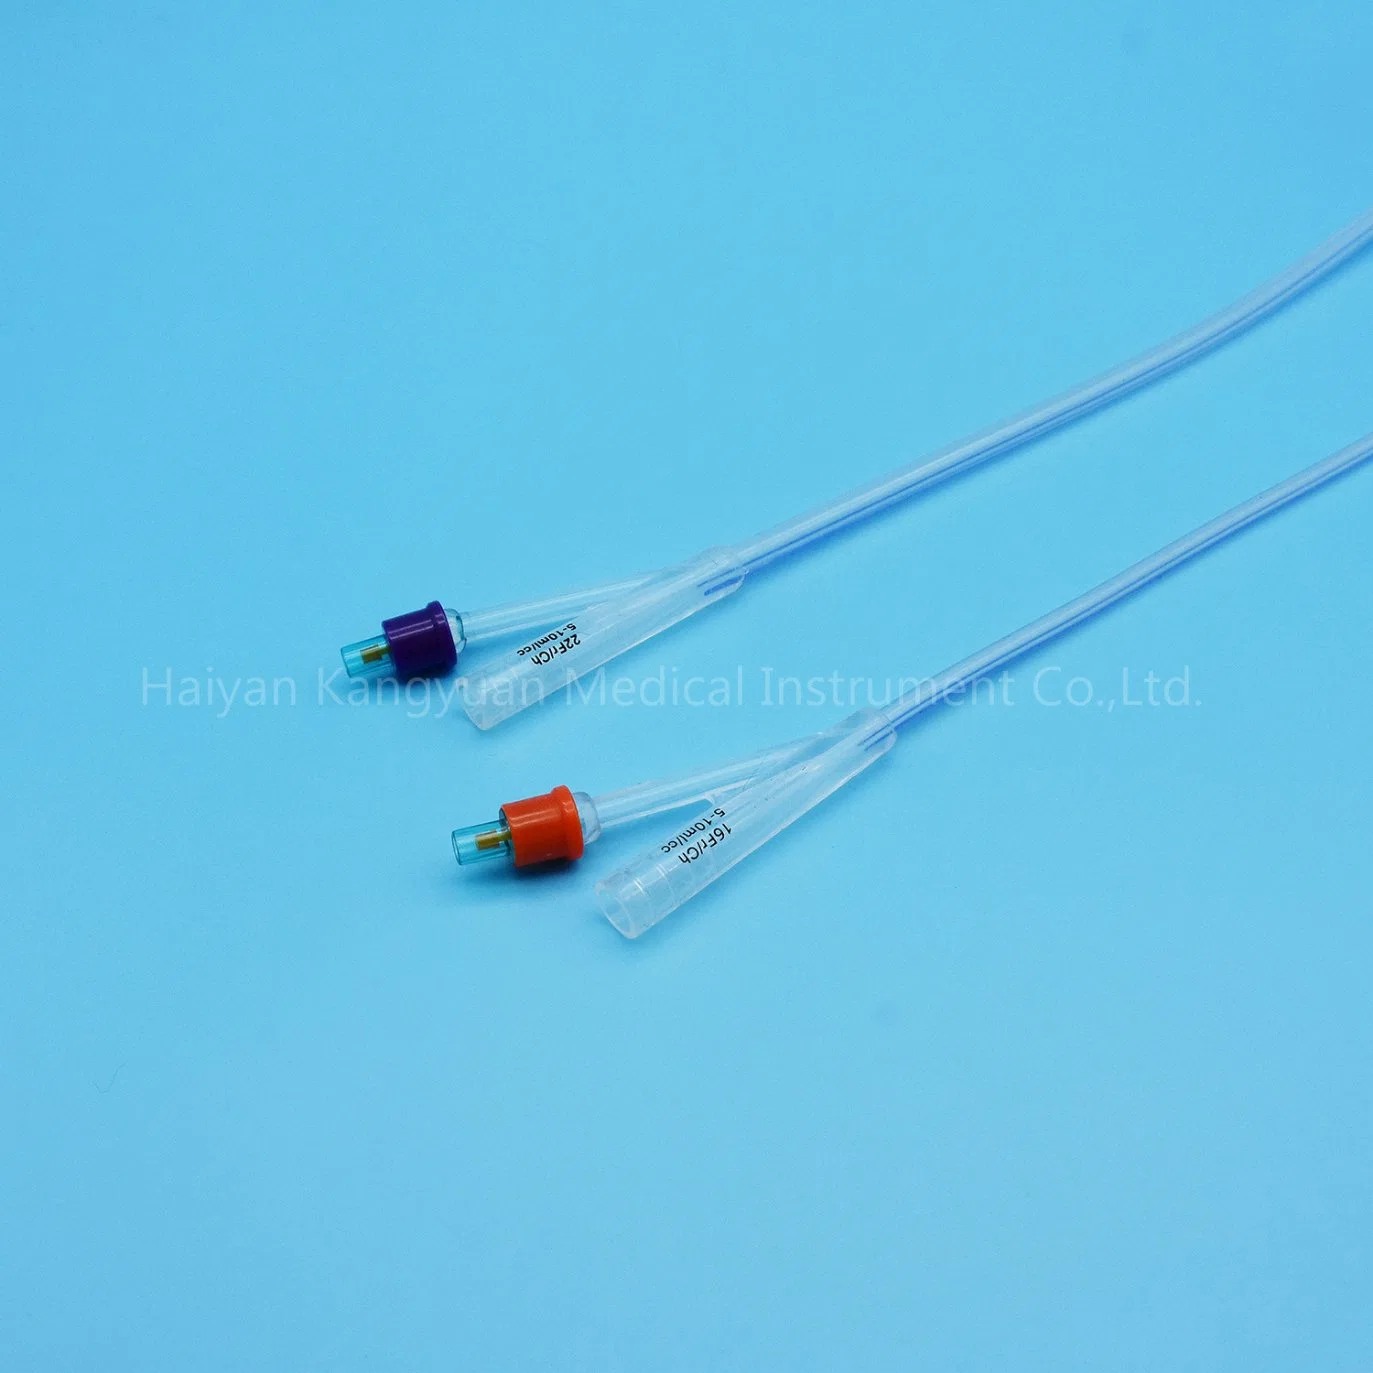 Standard 2 Way Silicone Foley Catheter for Single Use China Factory Round Tip with Normal Balloon